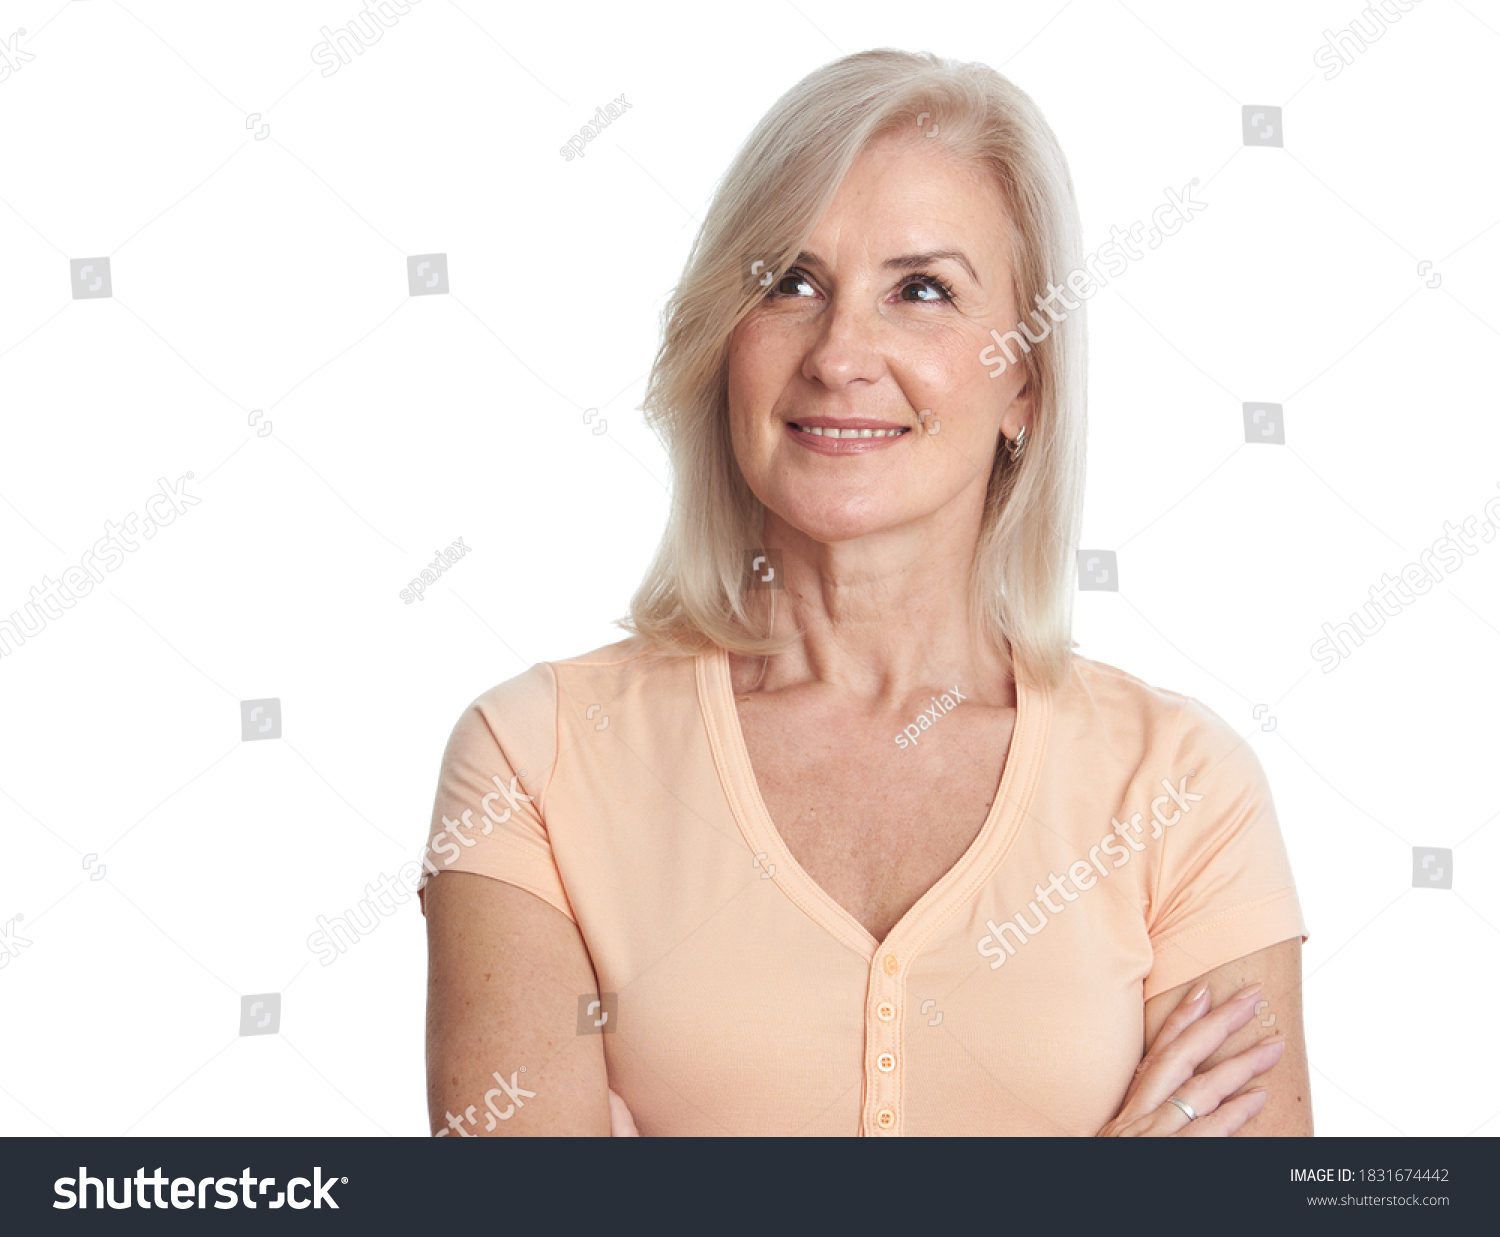 4,302 50 year old blonde woman Images, Stock Photos & Vectors ...